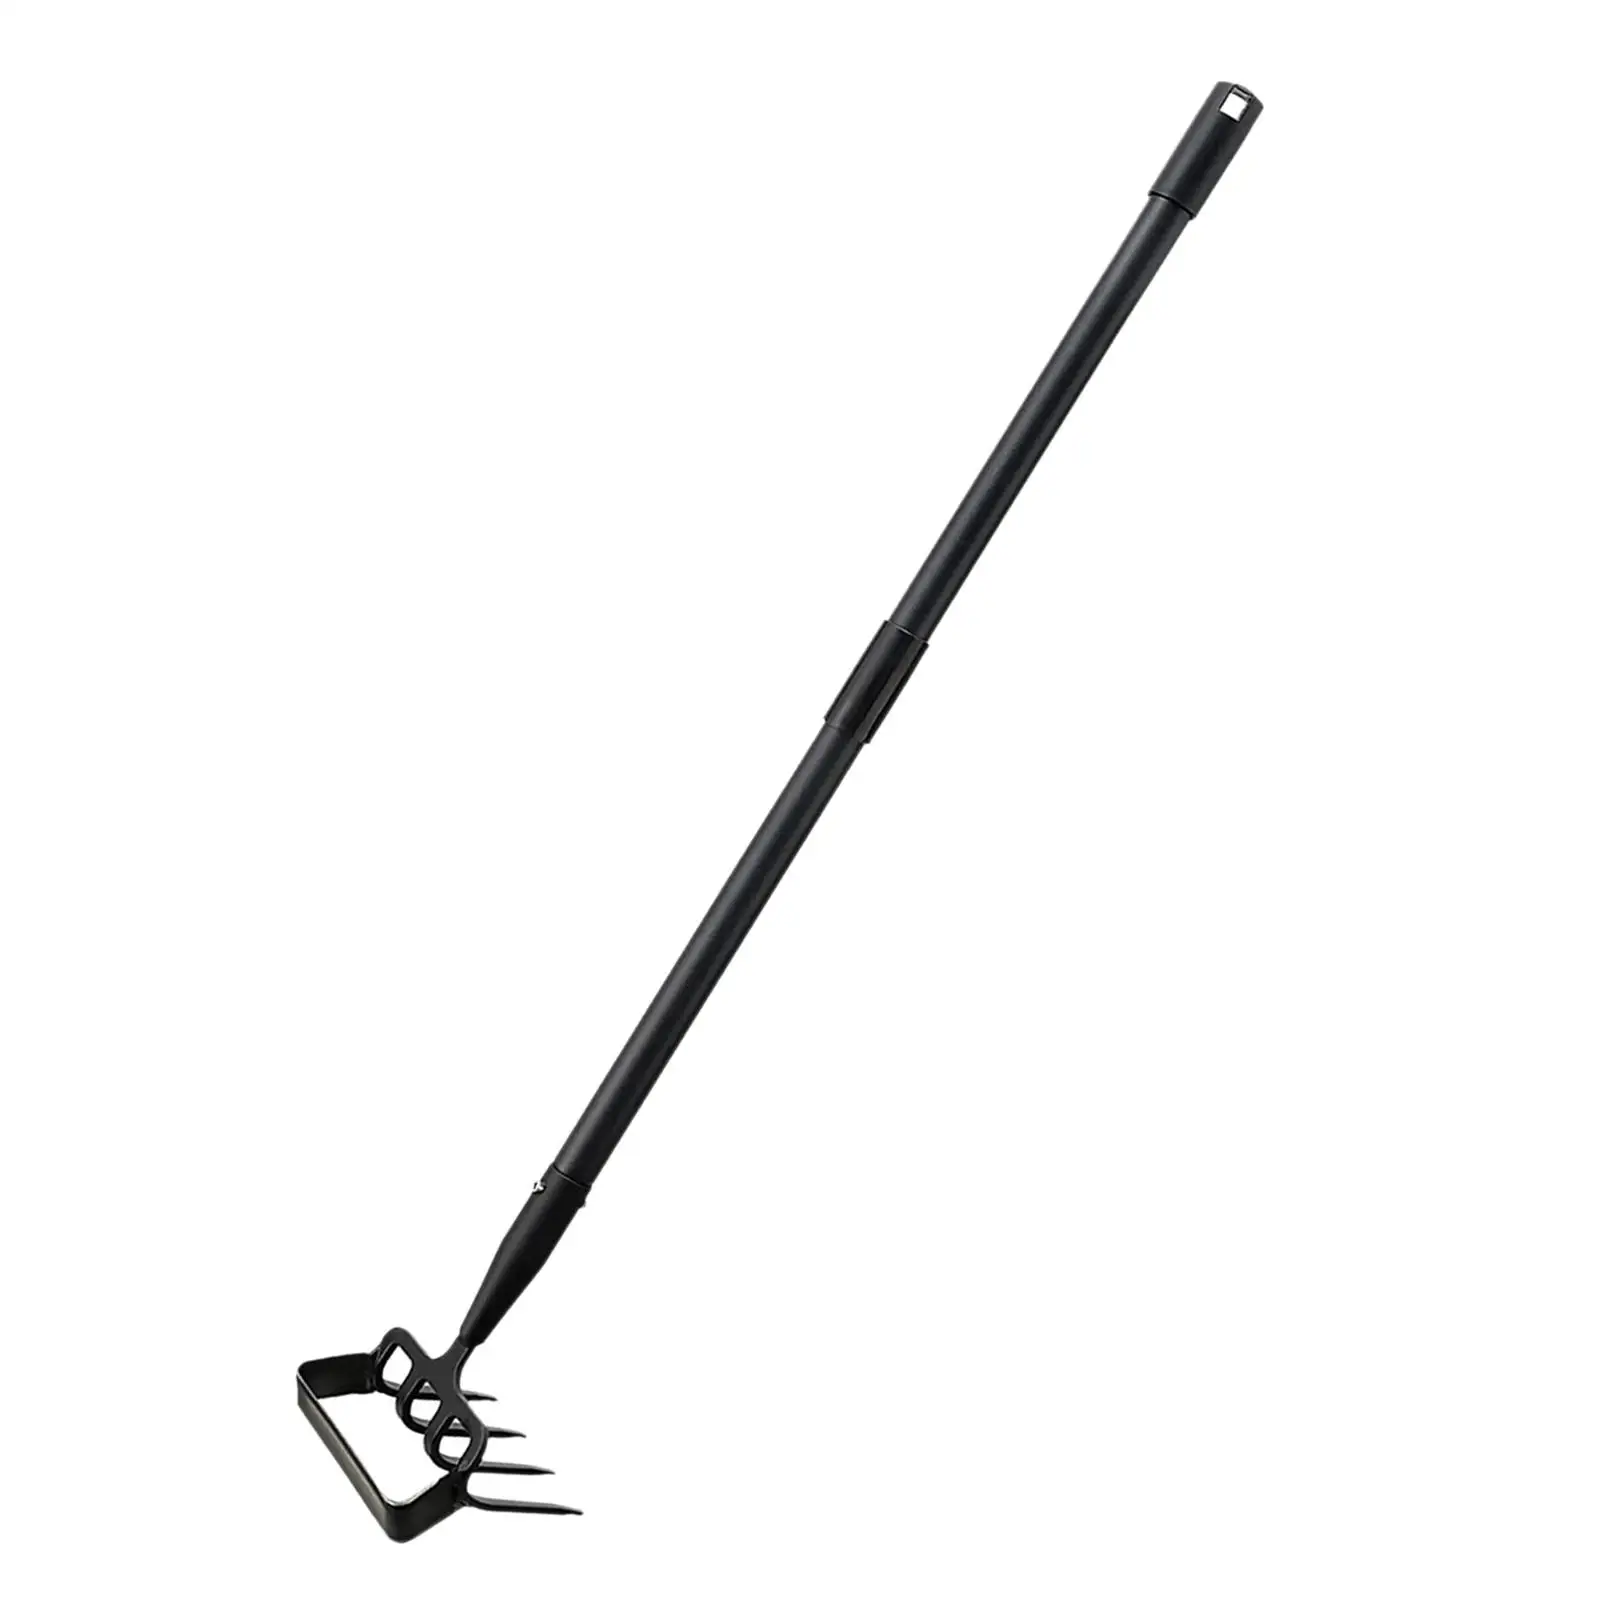 Garden Tool 2 in 1 Stirrup Hoe and Cultivator Stirrup Hoe and 4 Tines Rake for Loosening Planting Digging Weeding Cultivating